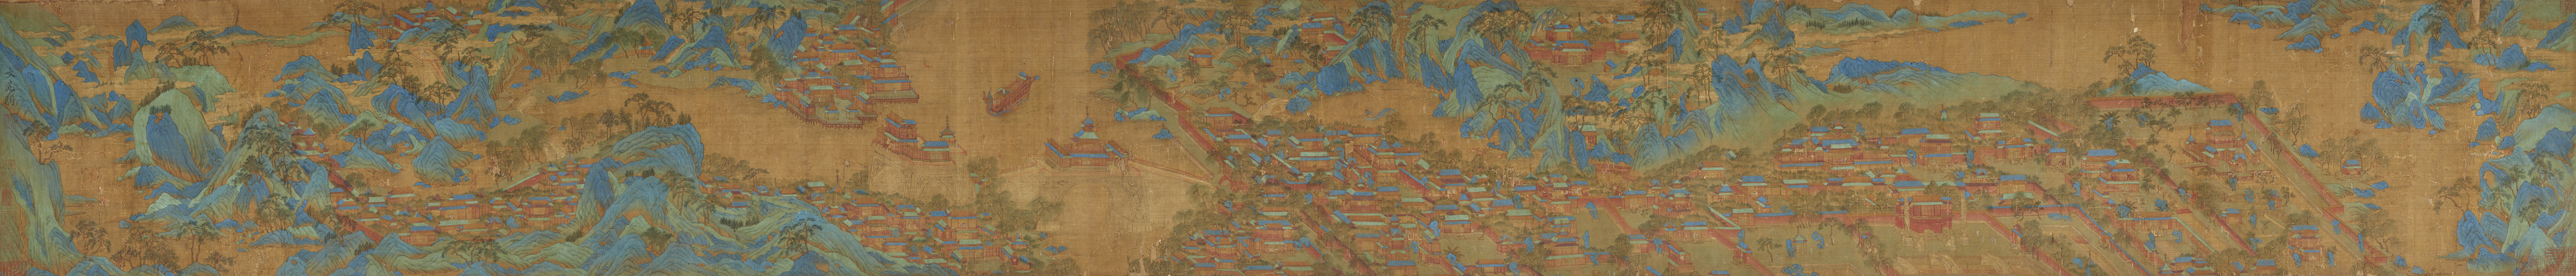 After Wen Zhengming . Qing dynasty - A palace and temple complex in a mountain landscape in blue-green style. - image-3